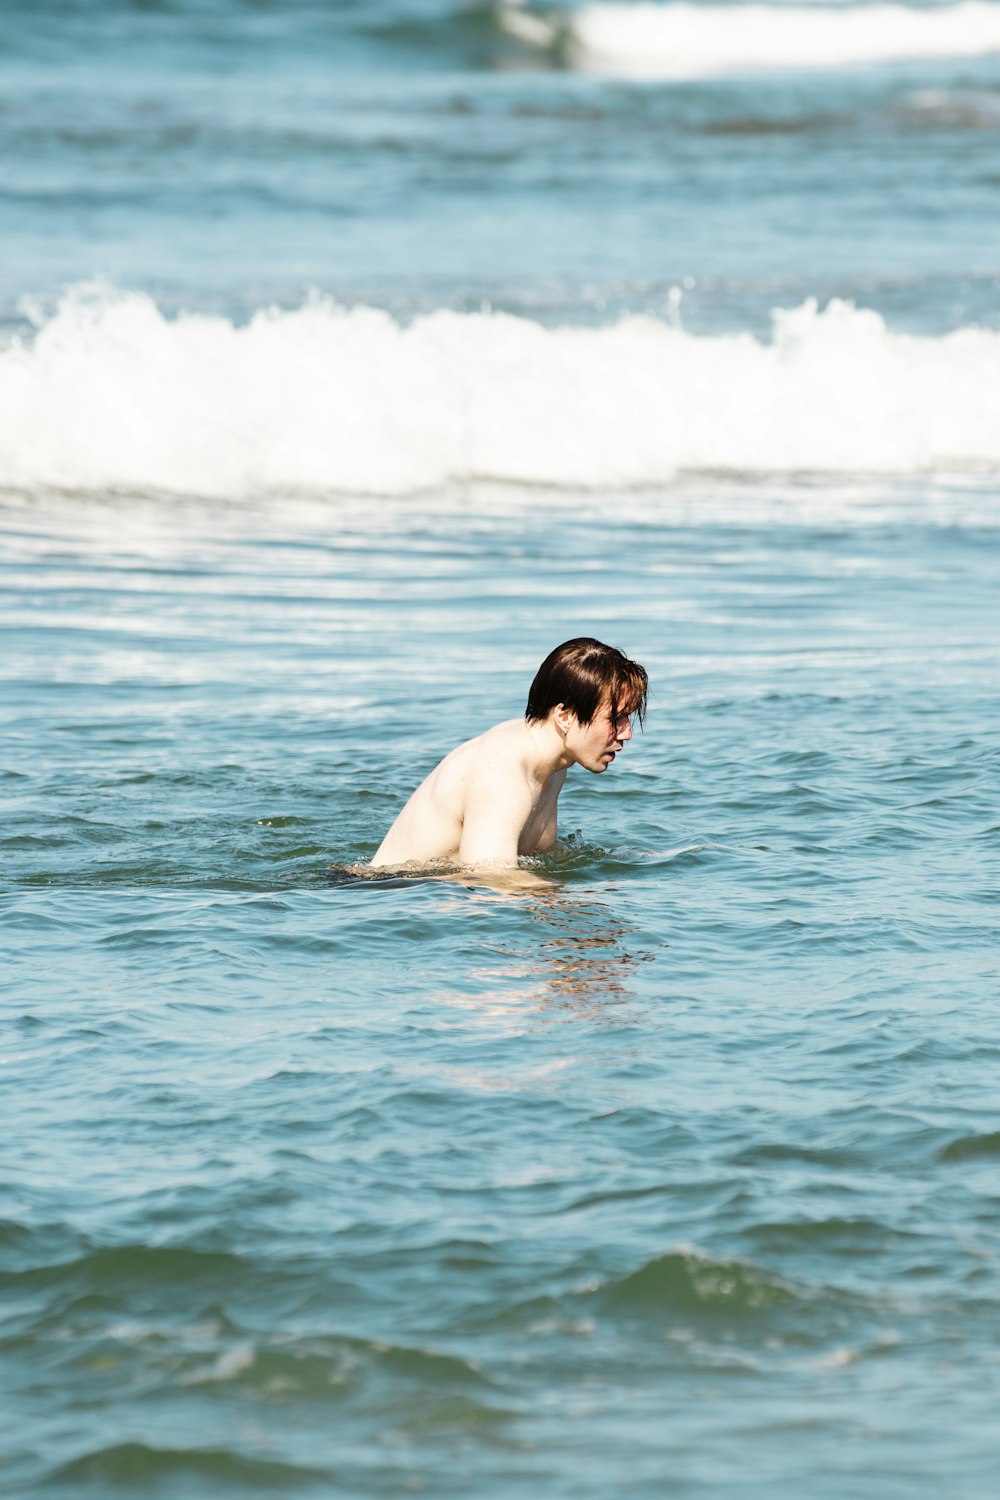 a man swimming in the ocean with a surfboard